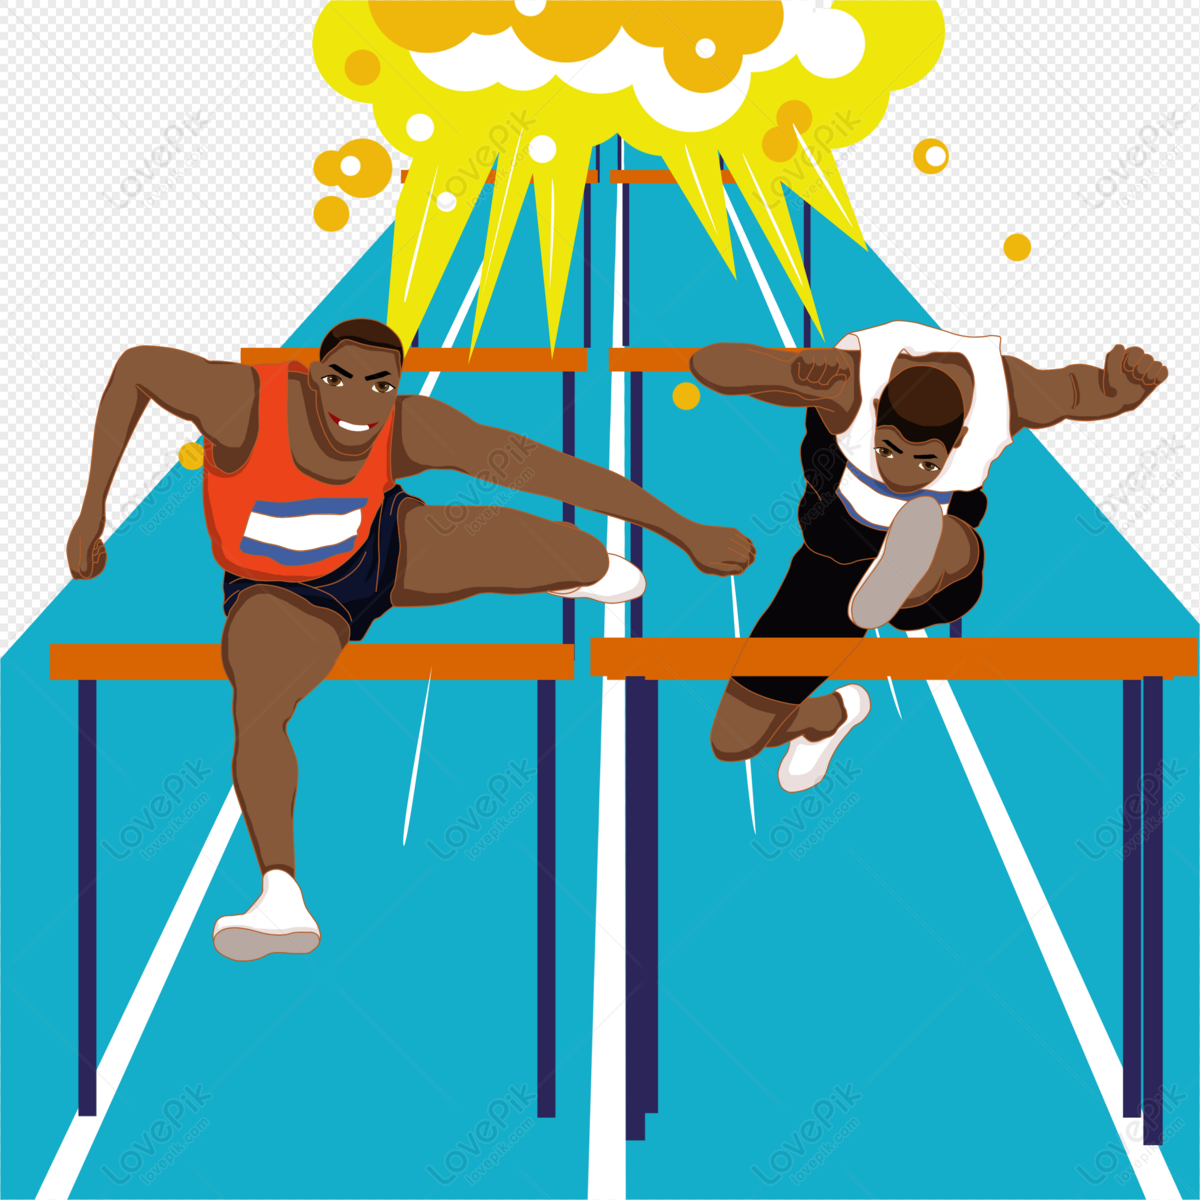 track and field clipart hurdles